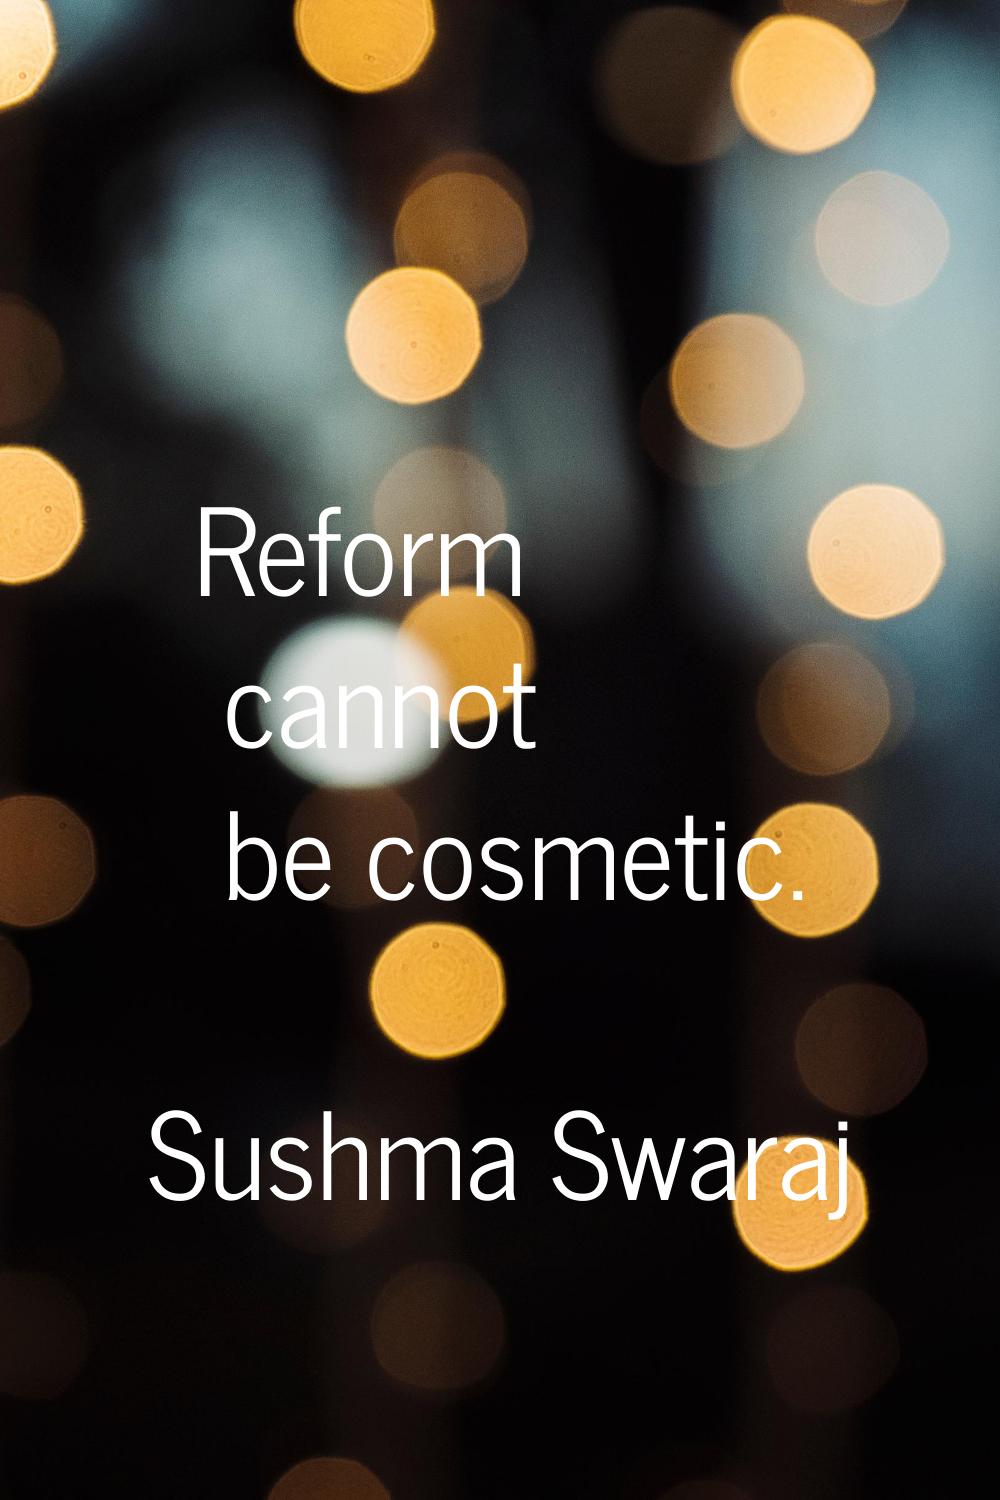 Reform cannot be cosmetic.